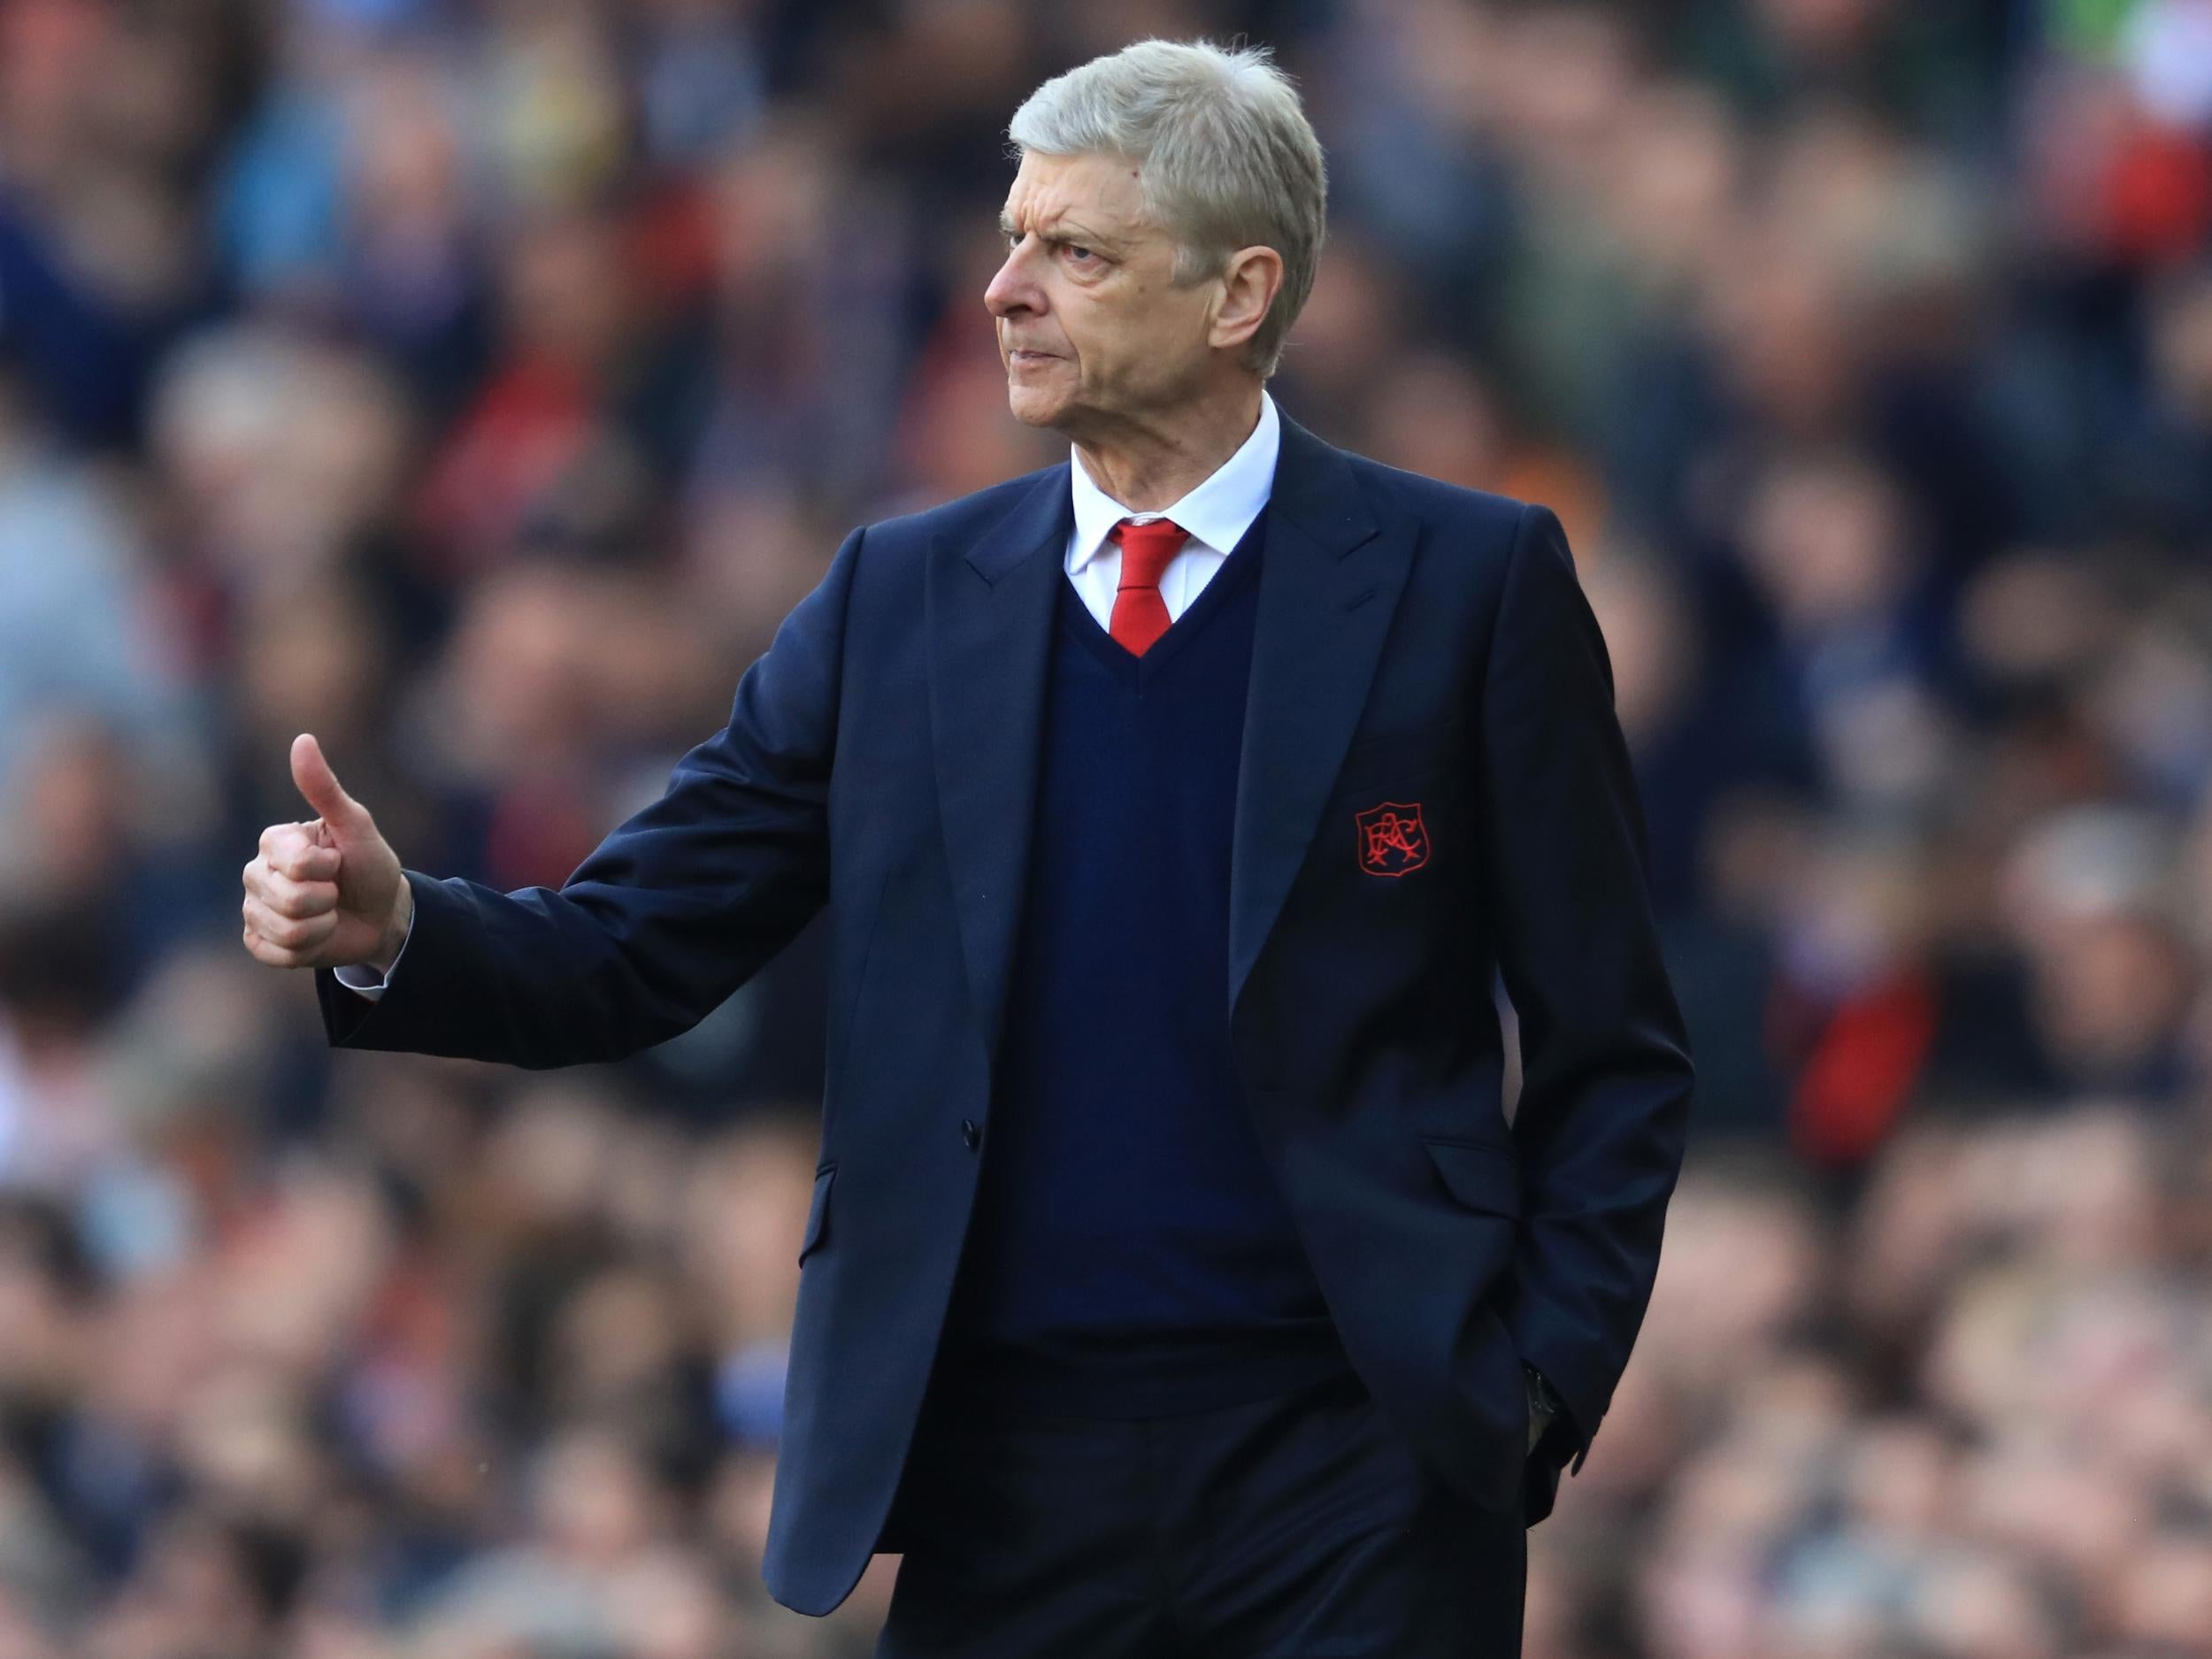 The Gunners face an uphill task to usurp Liverpool and secure Champions League football